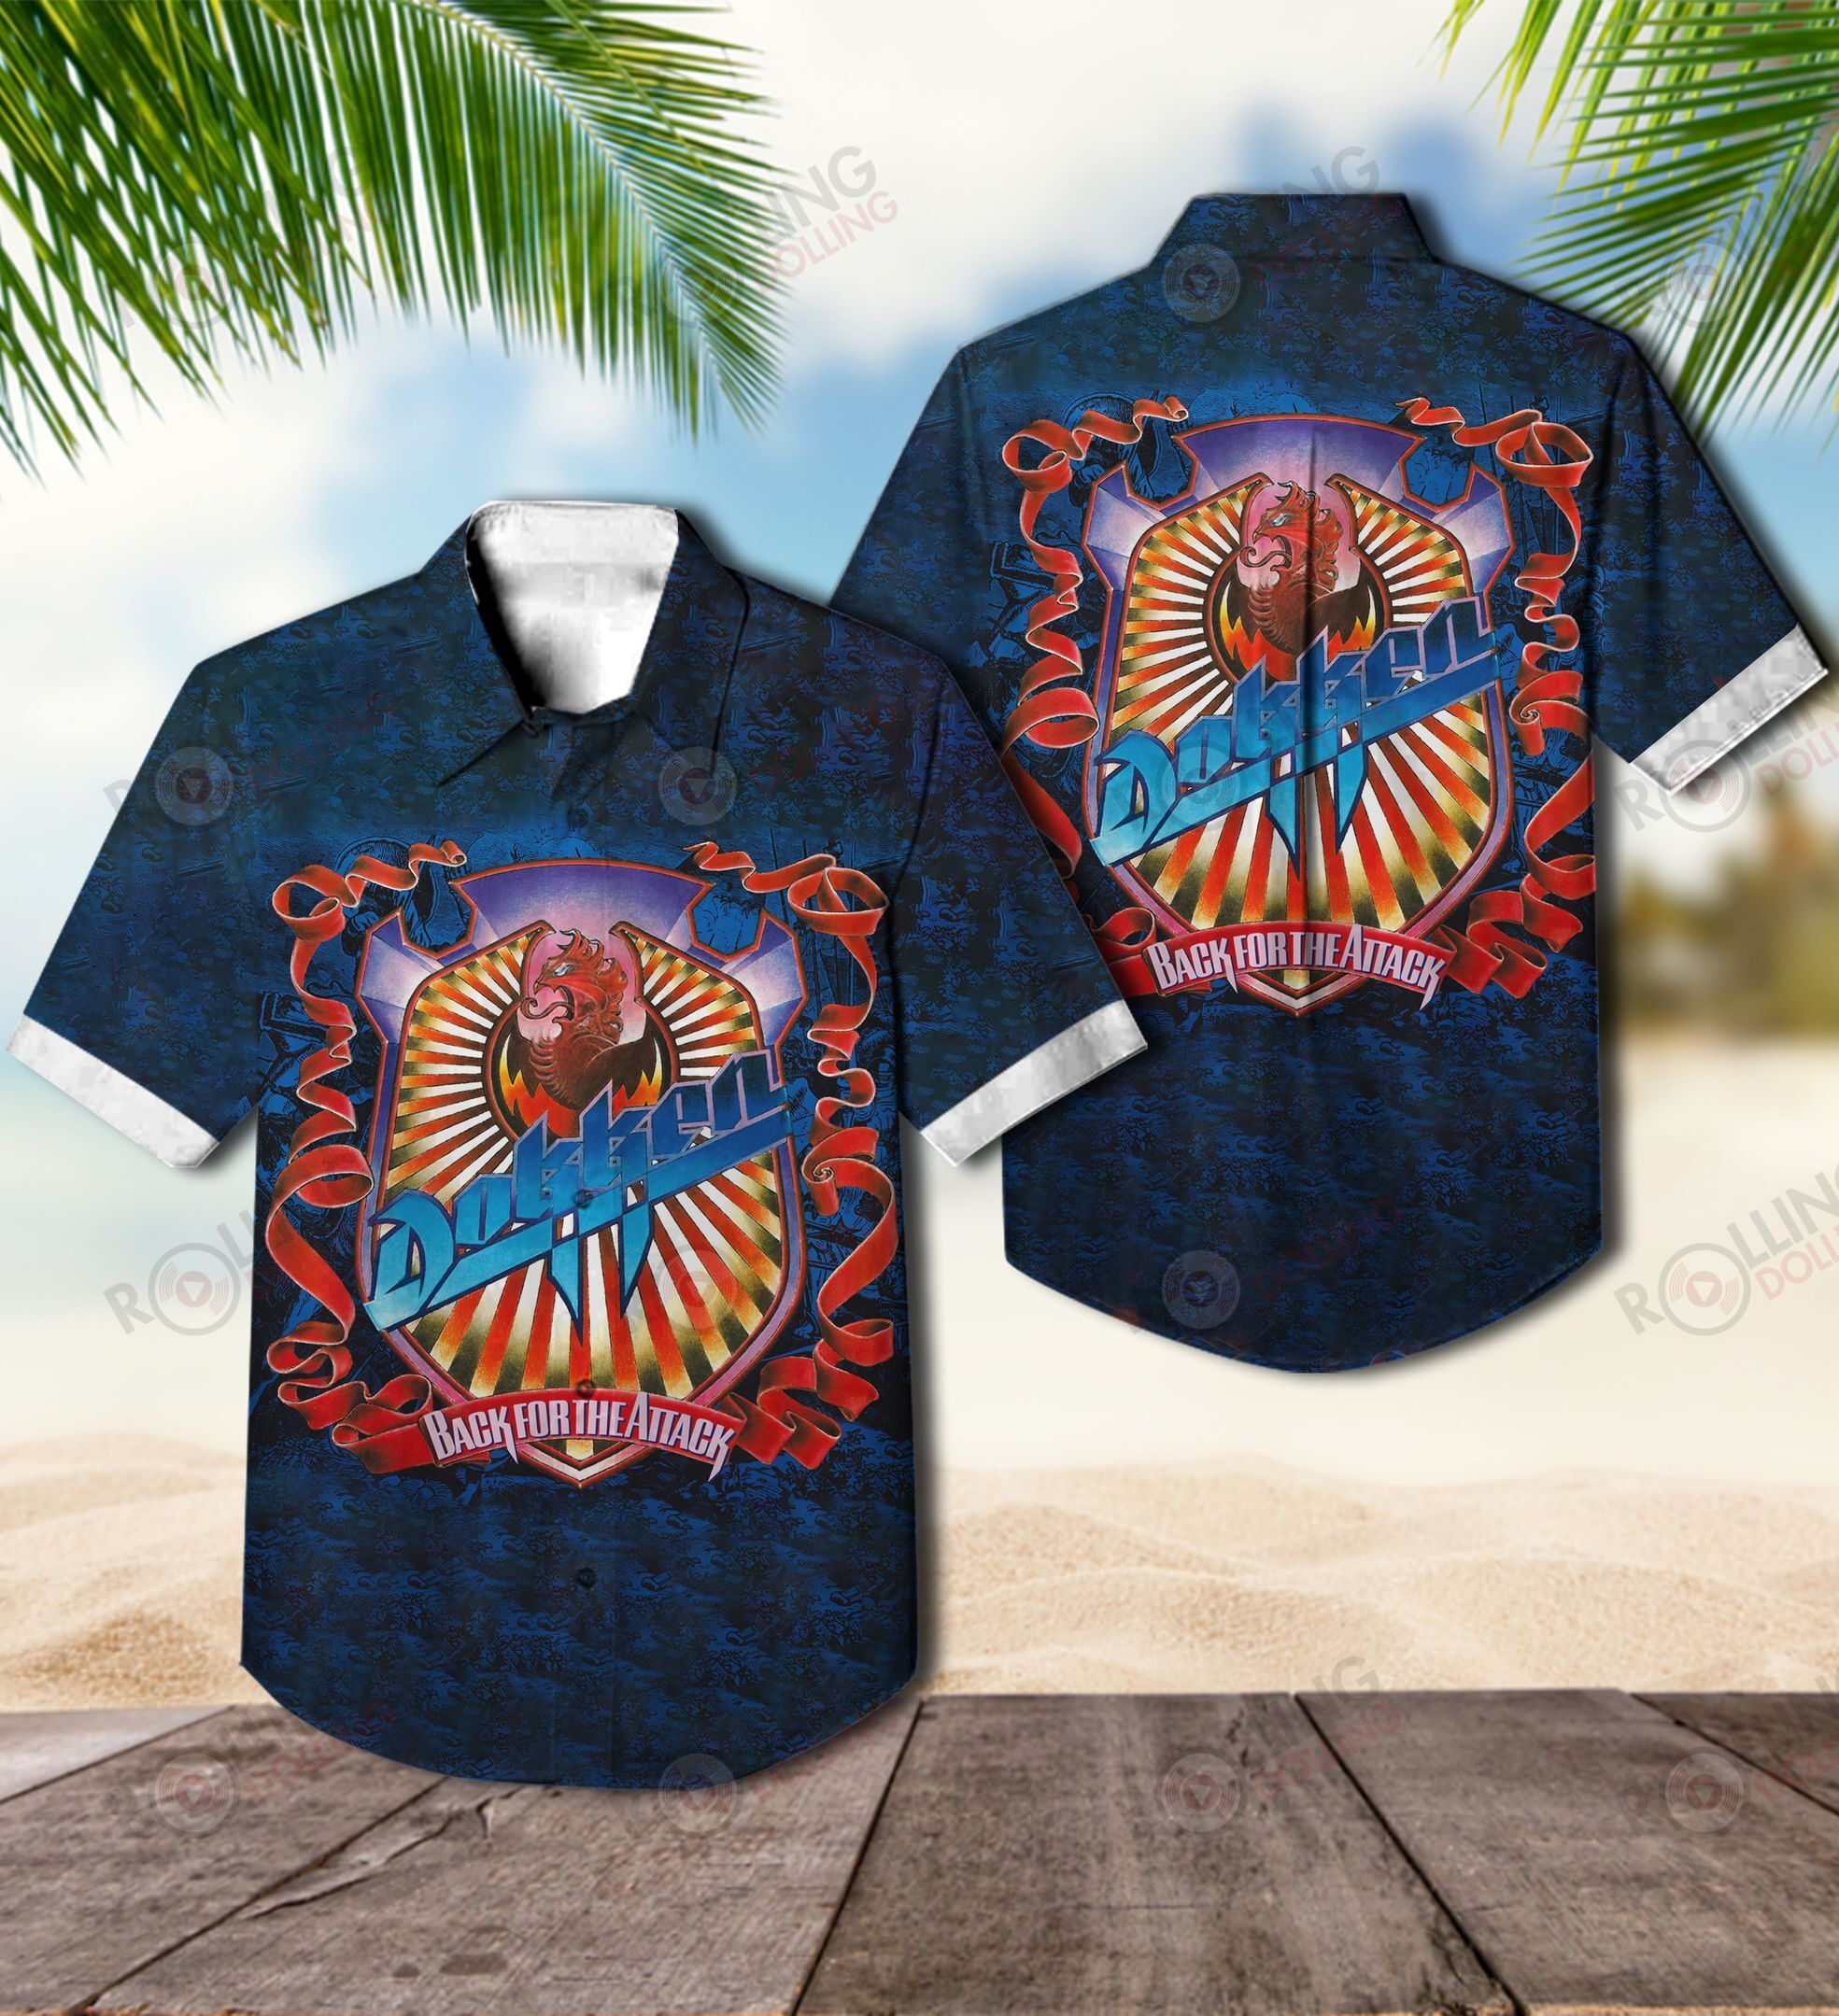 This would make a great gift for any fan who loves Hawaiian Shirt as well as Rock band 140